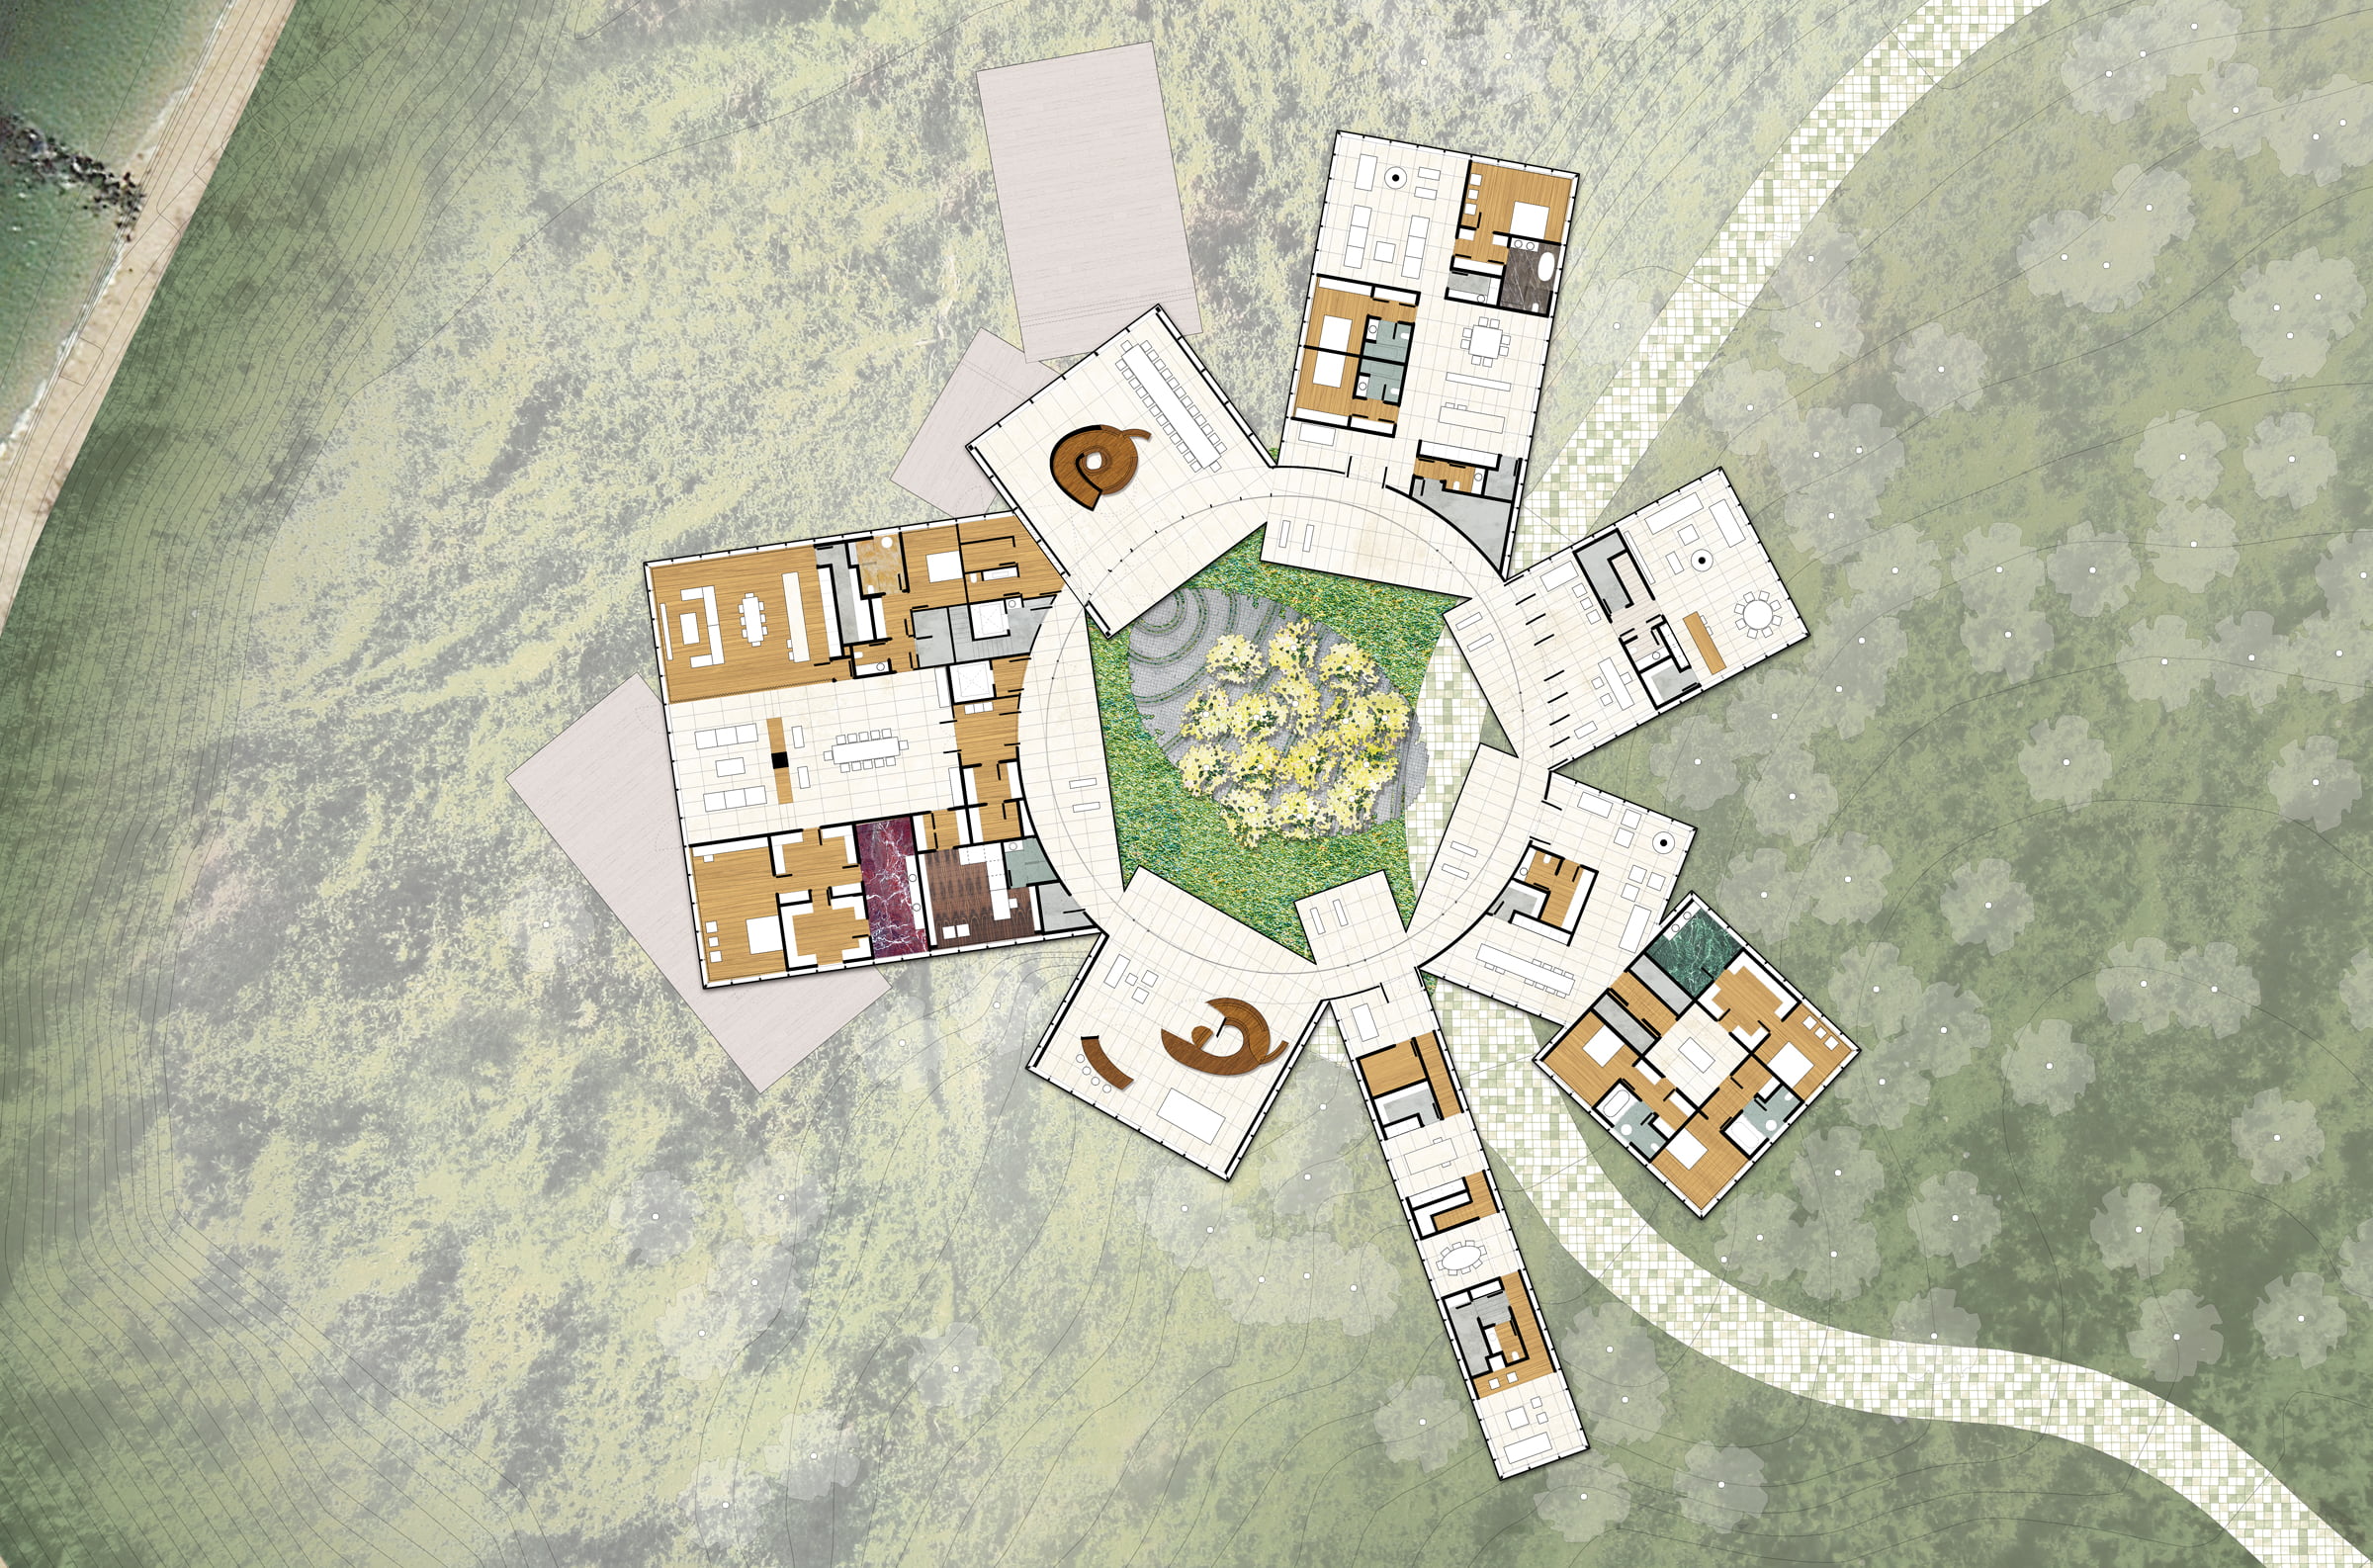 Necklace Residence Plan Level 1.